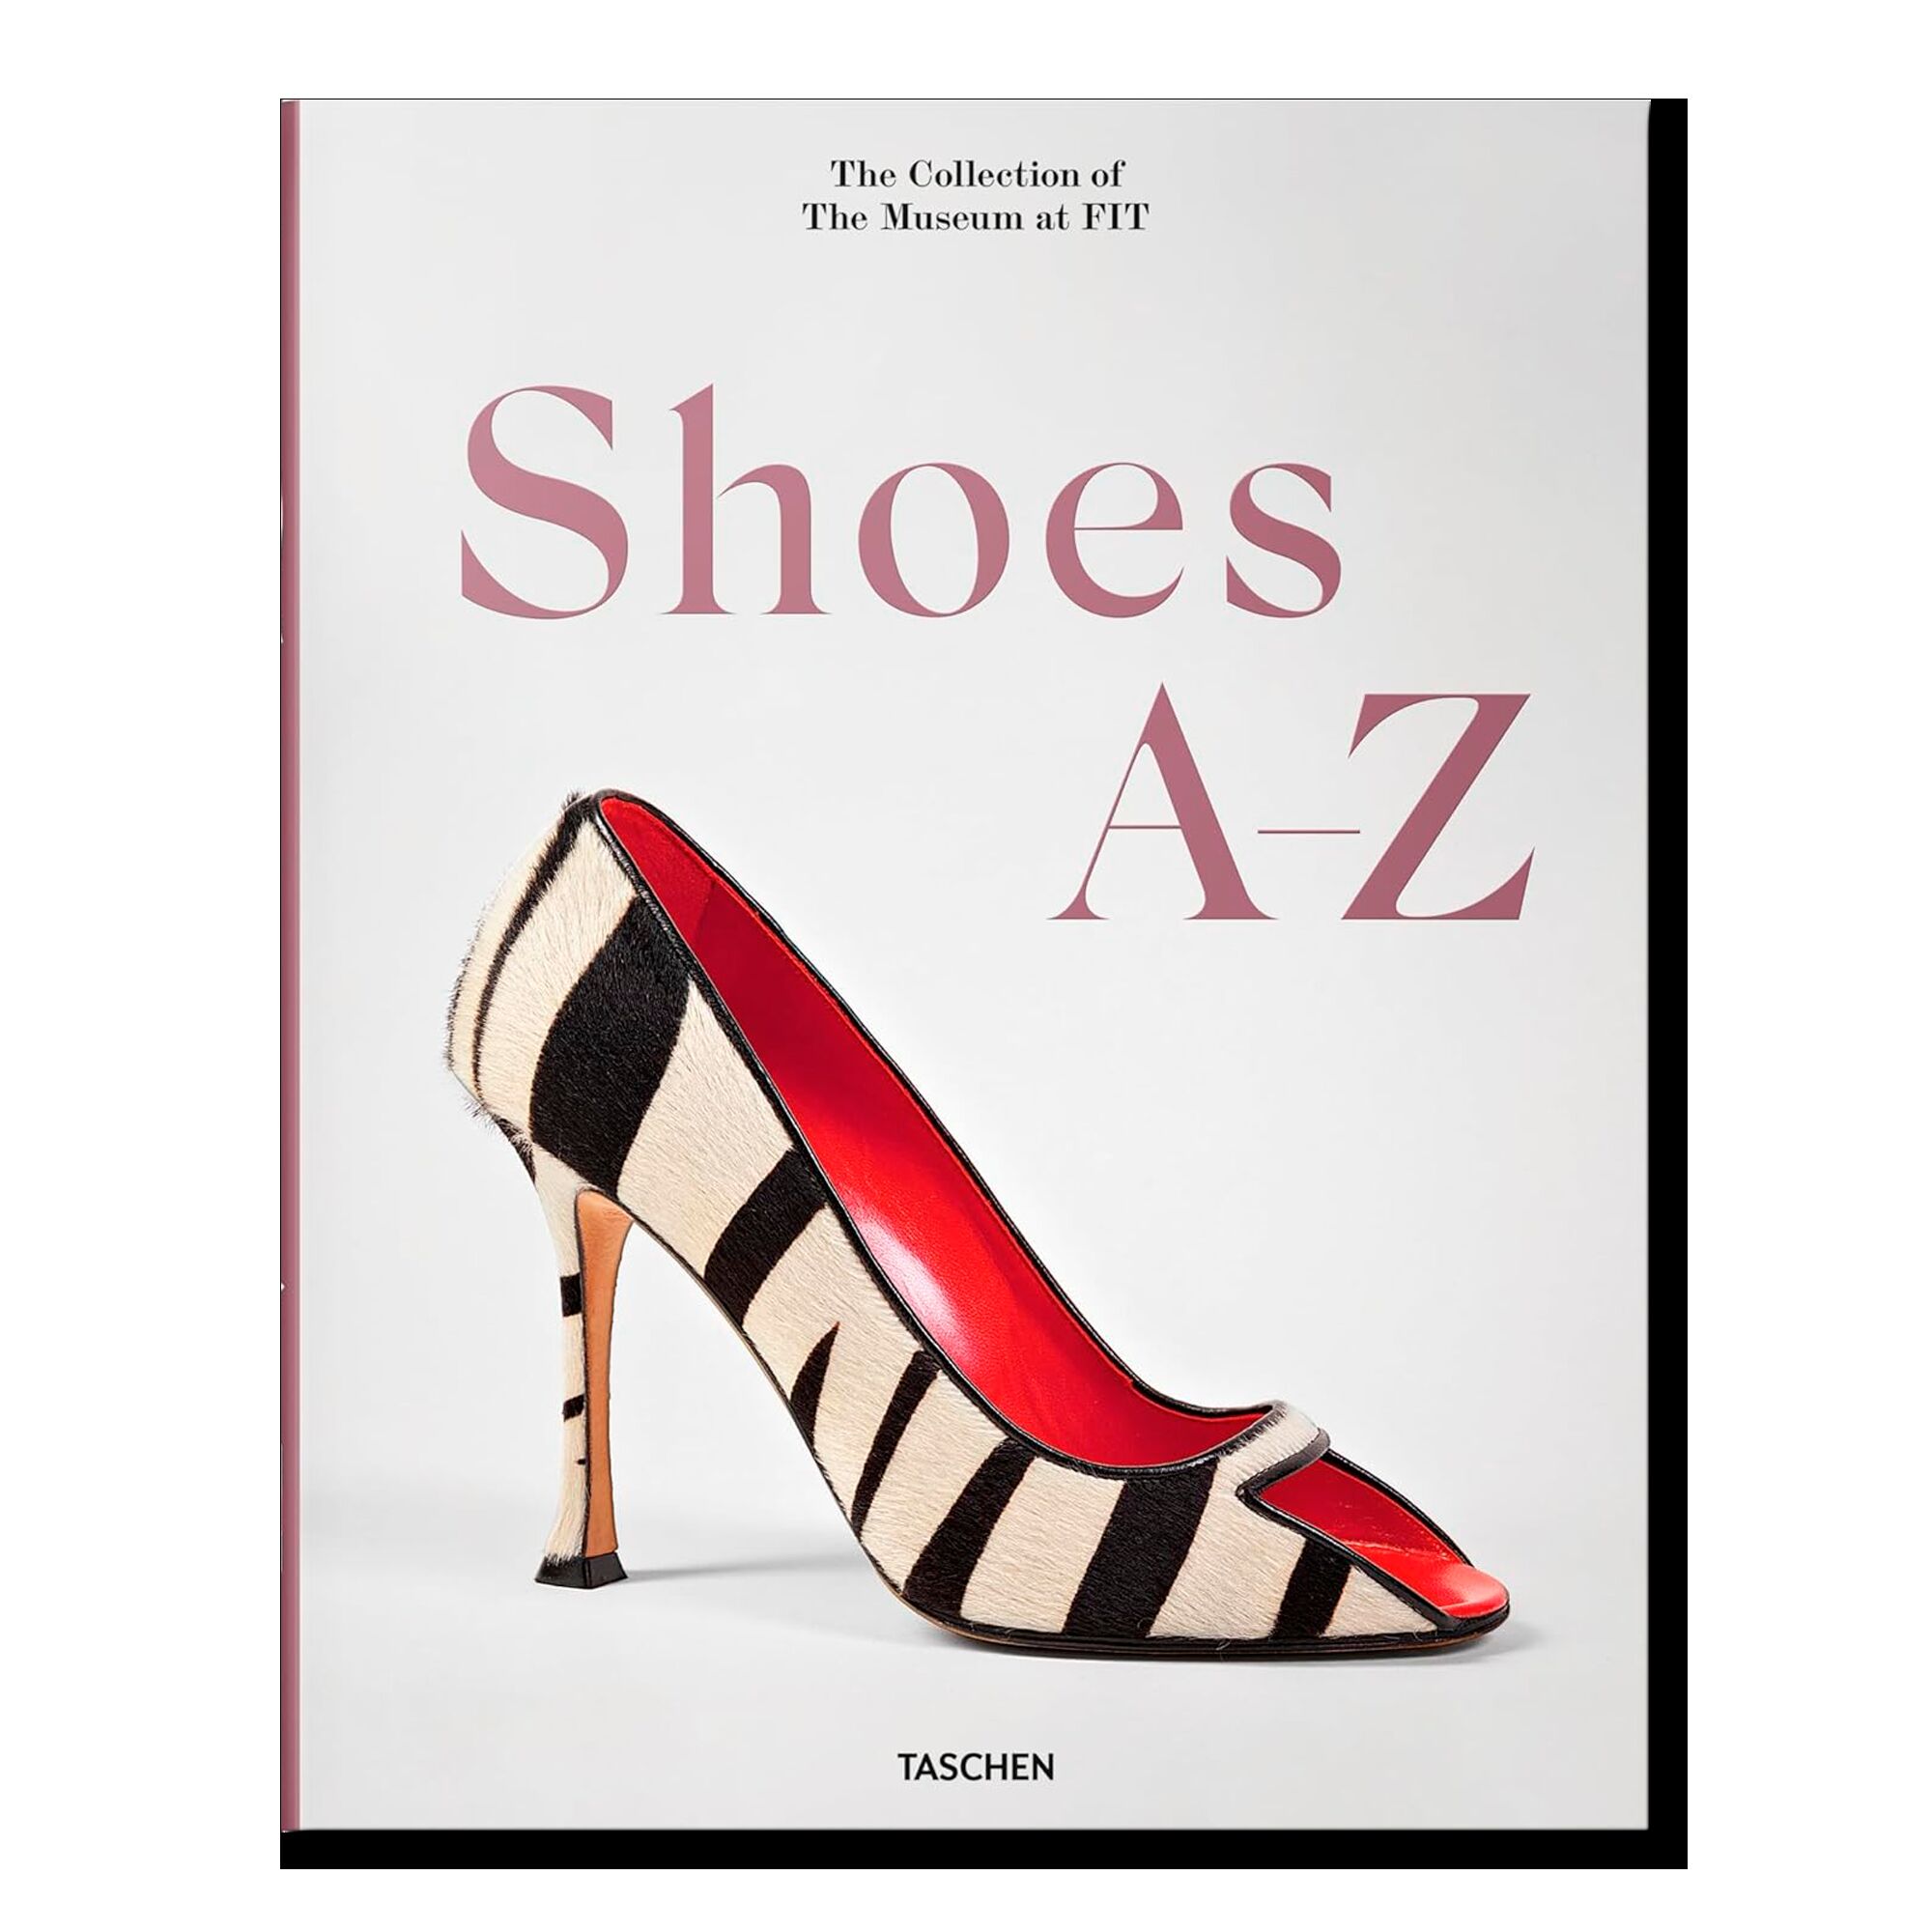 Shoes A-Z: The Collection of the Museum at Fit